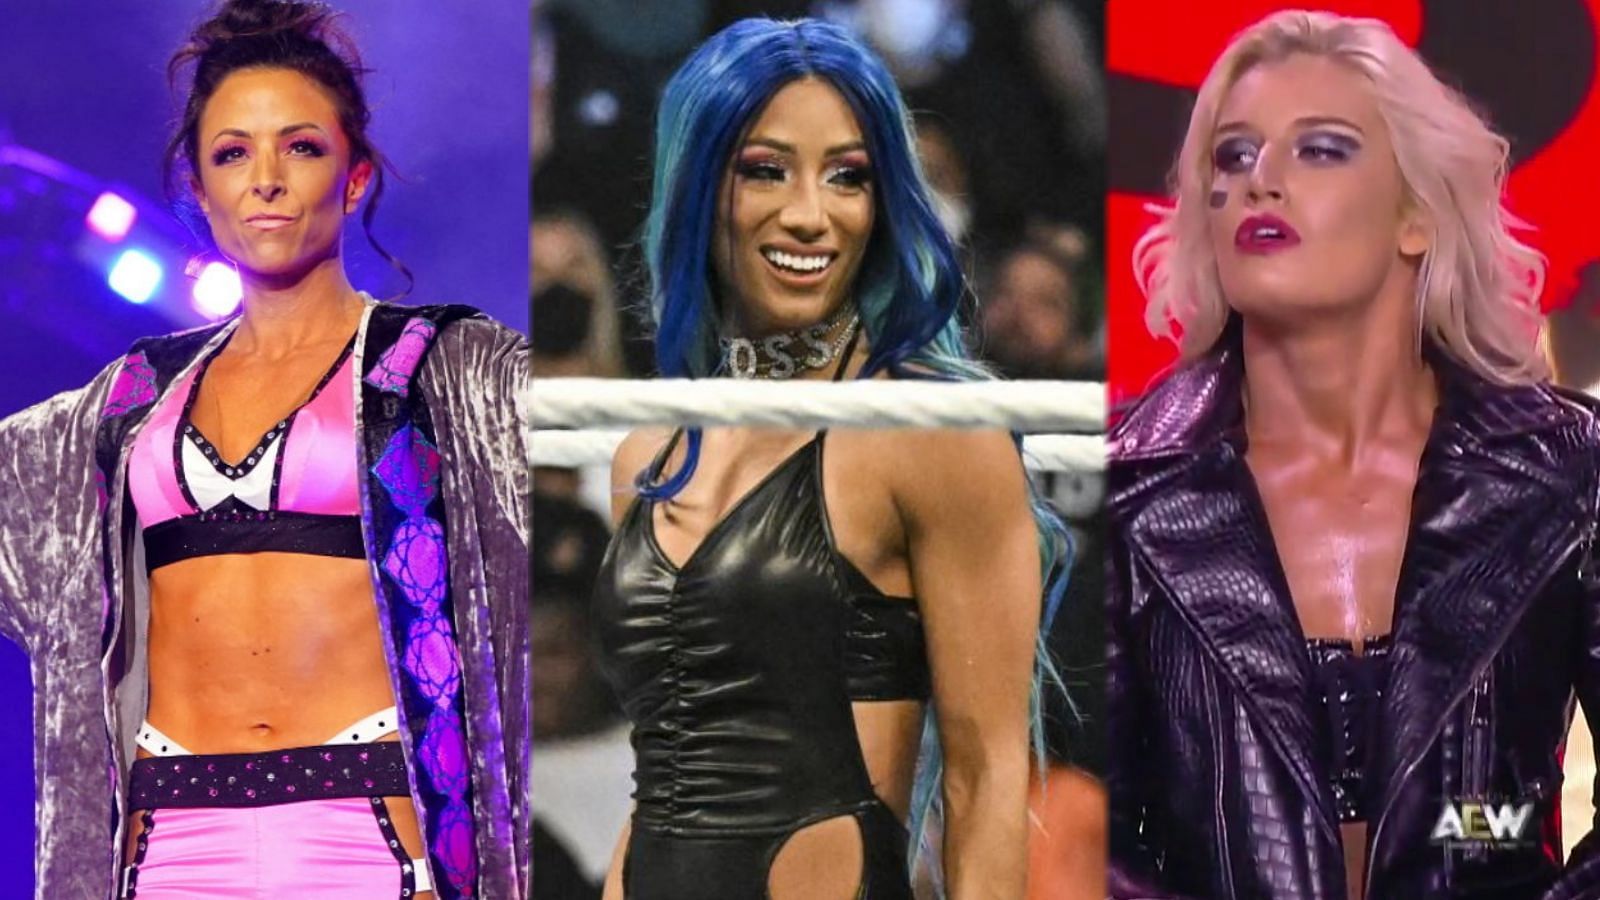 Which star would Sasha Banks clash with first upon entering AEW?